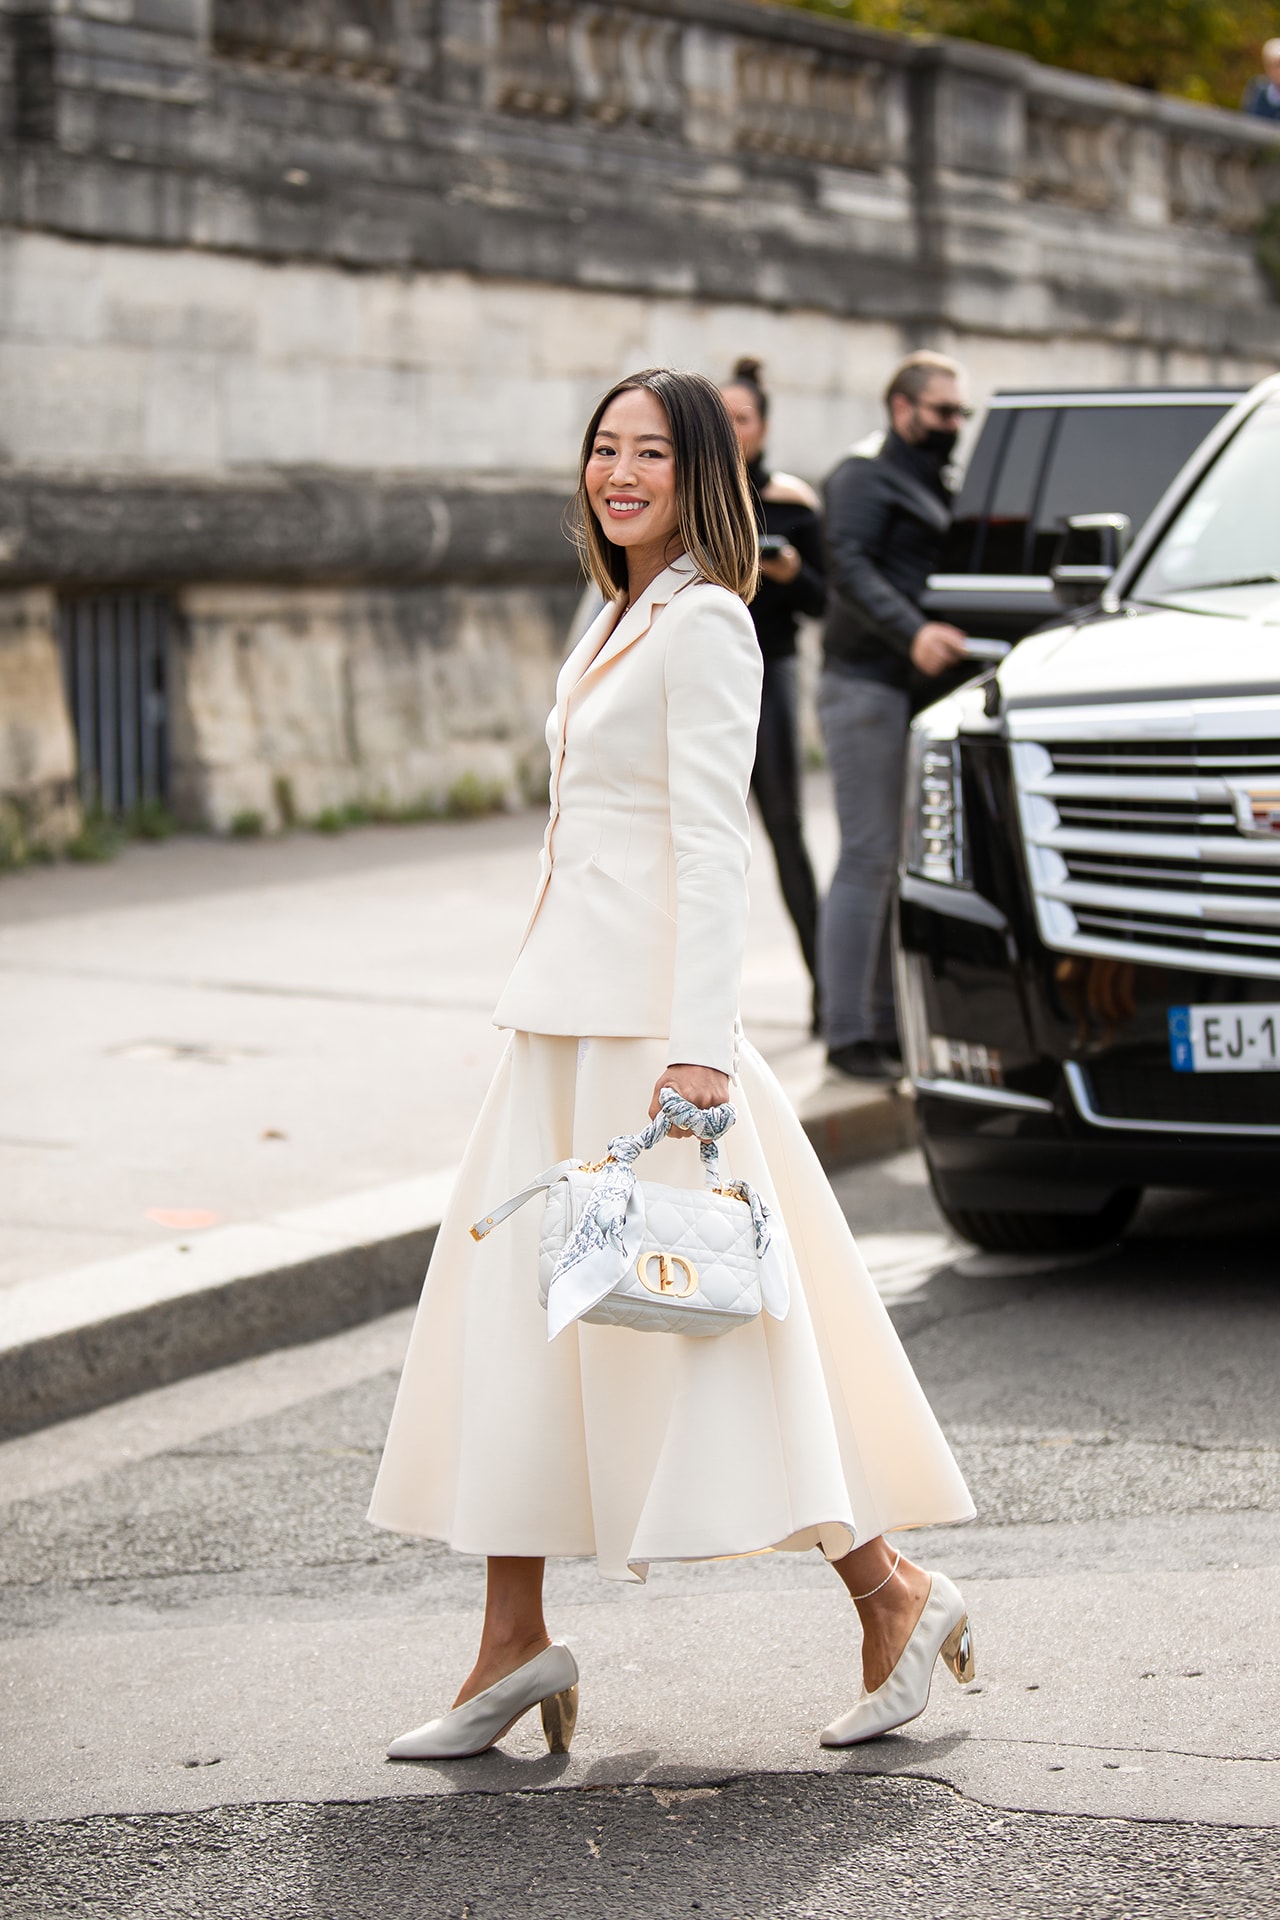 Paris Fashion Week Spring Summer 2022 SS22 Street Style Look Outfit Influencer Aimee Song Dior Skirt Jacket Heels